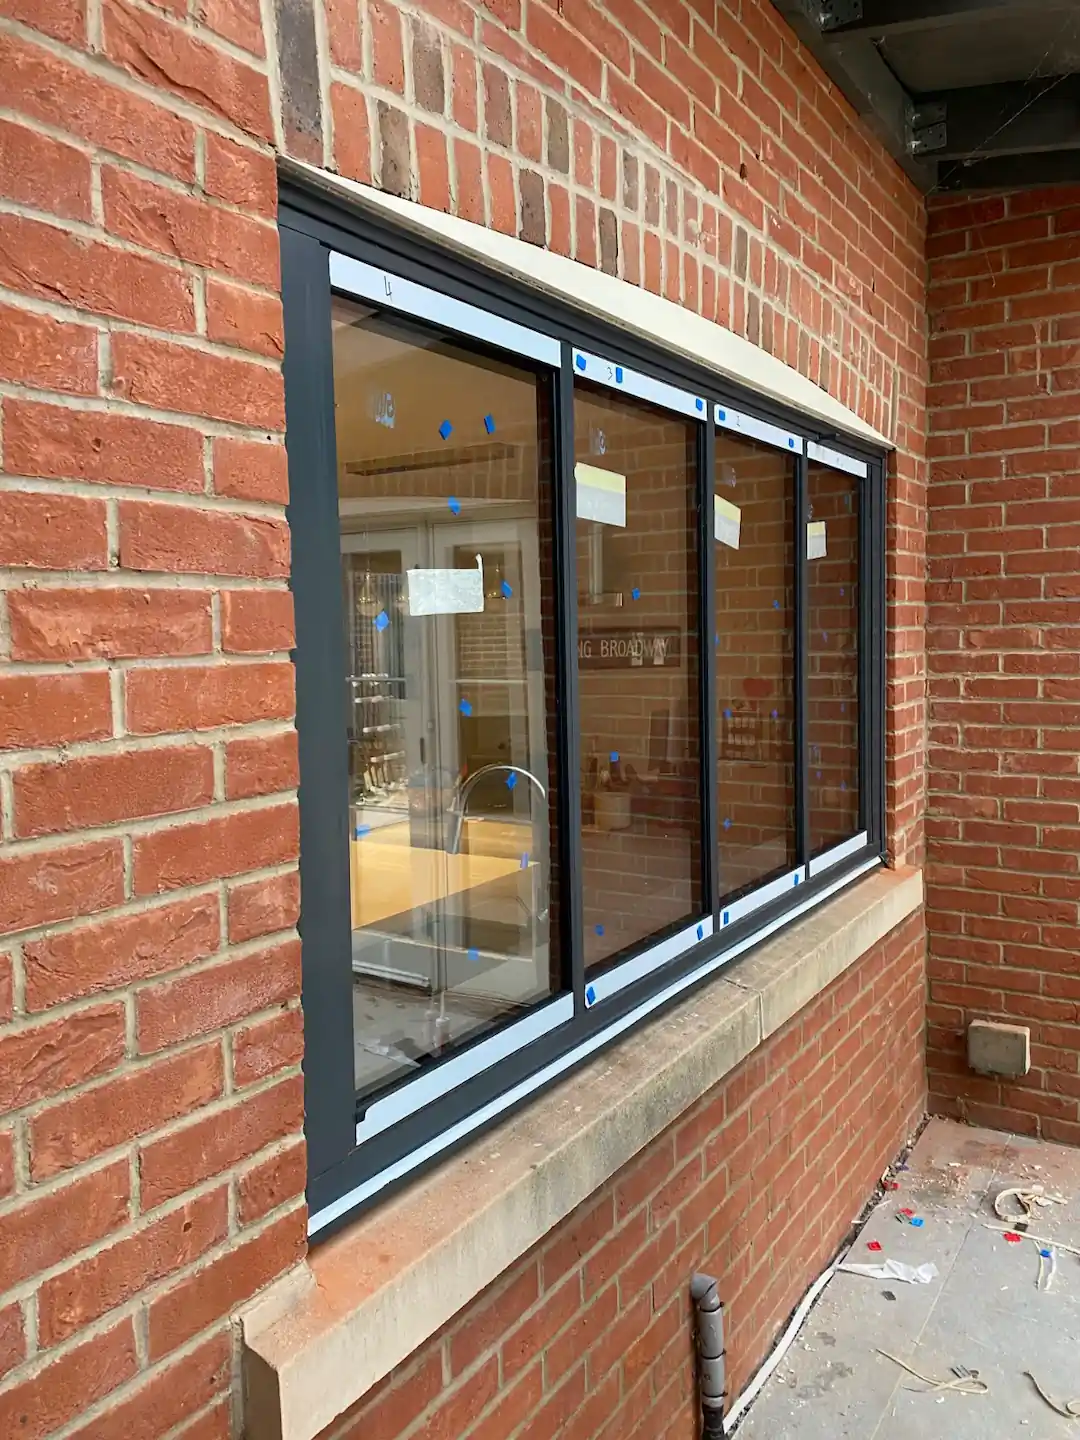 Slide and turn window with same mechanism and frames as the Ultra Slim bifold doors